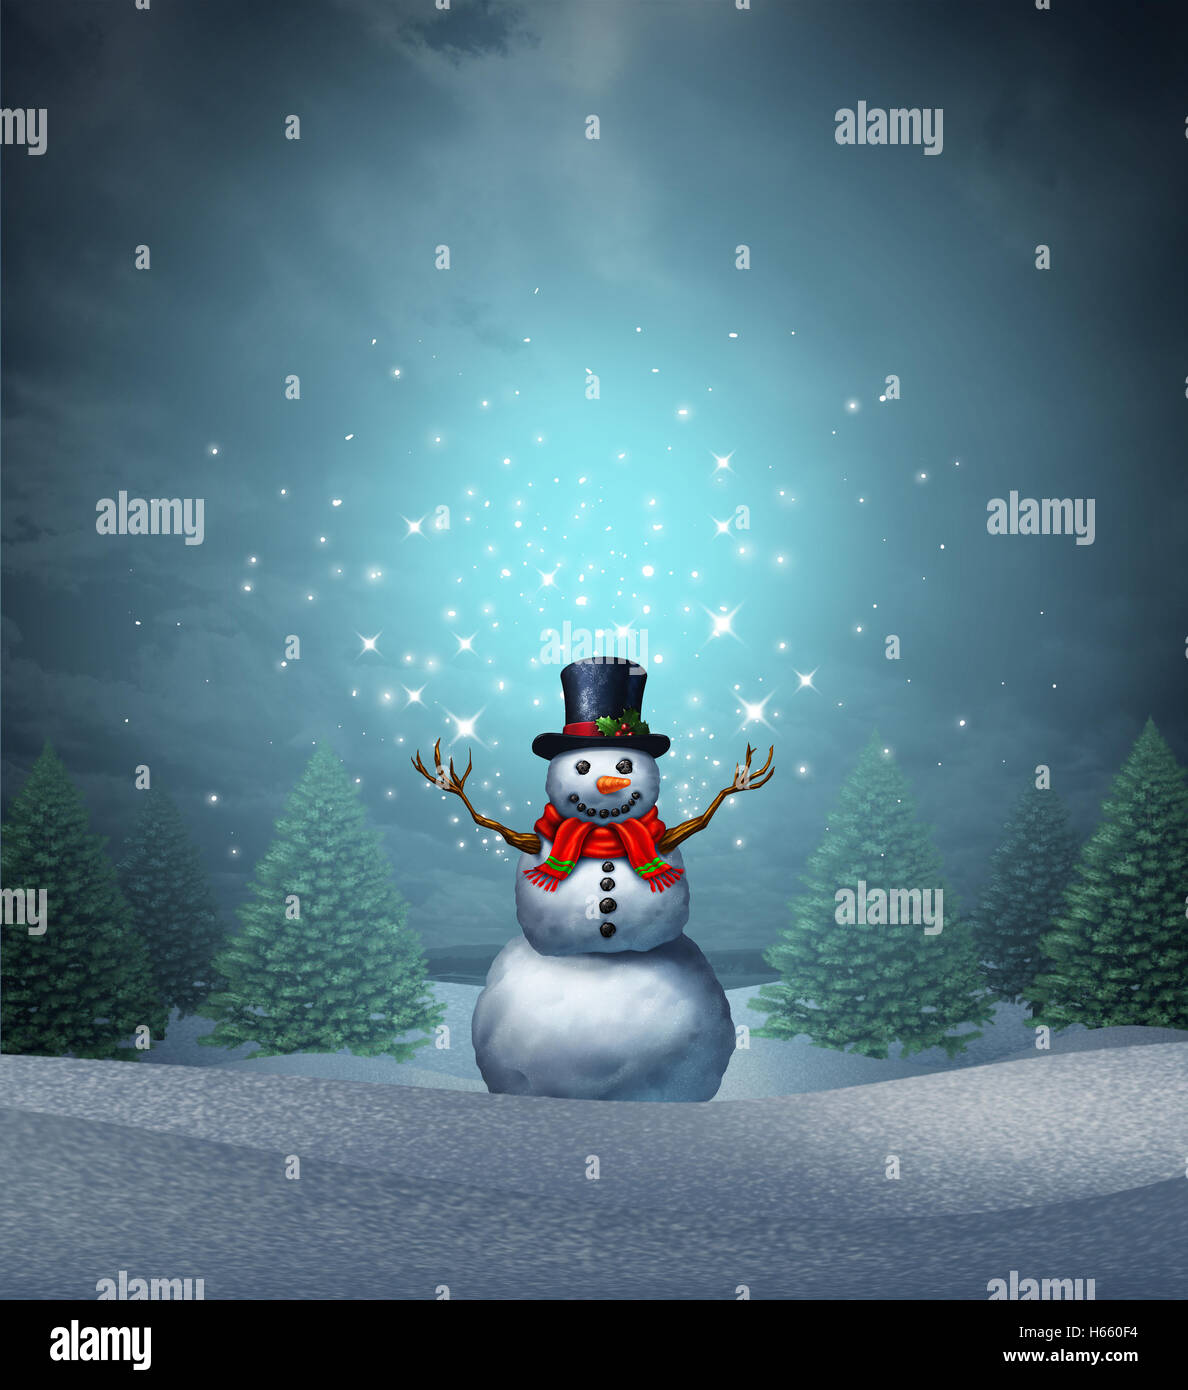 Magical snowman winter holiday as a merry christmas and happy new year greeting card with a cute happy snow character Stock Photo